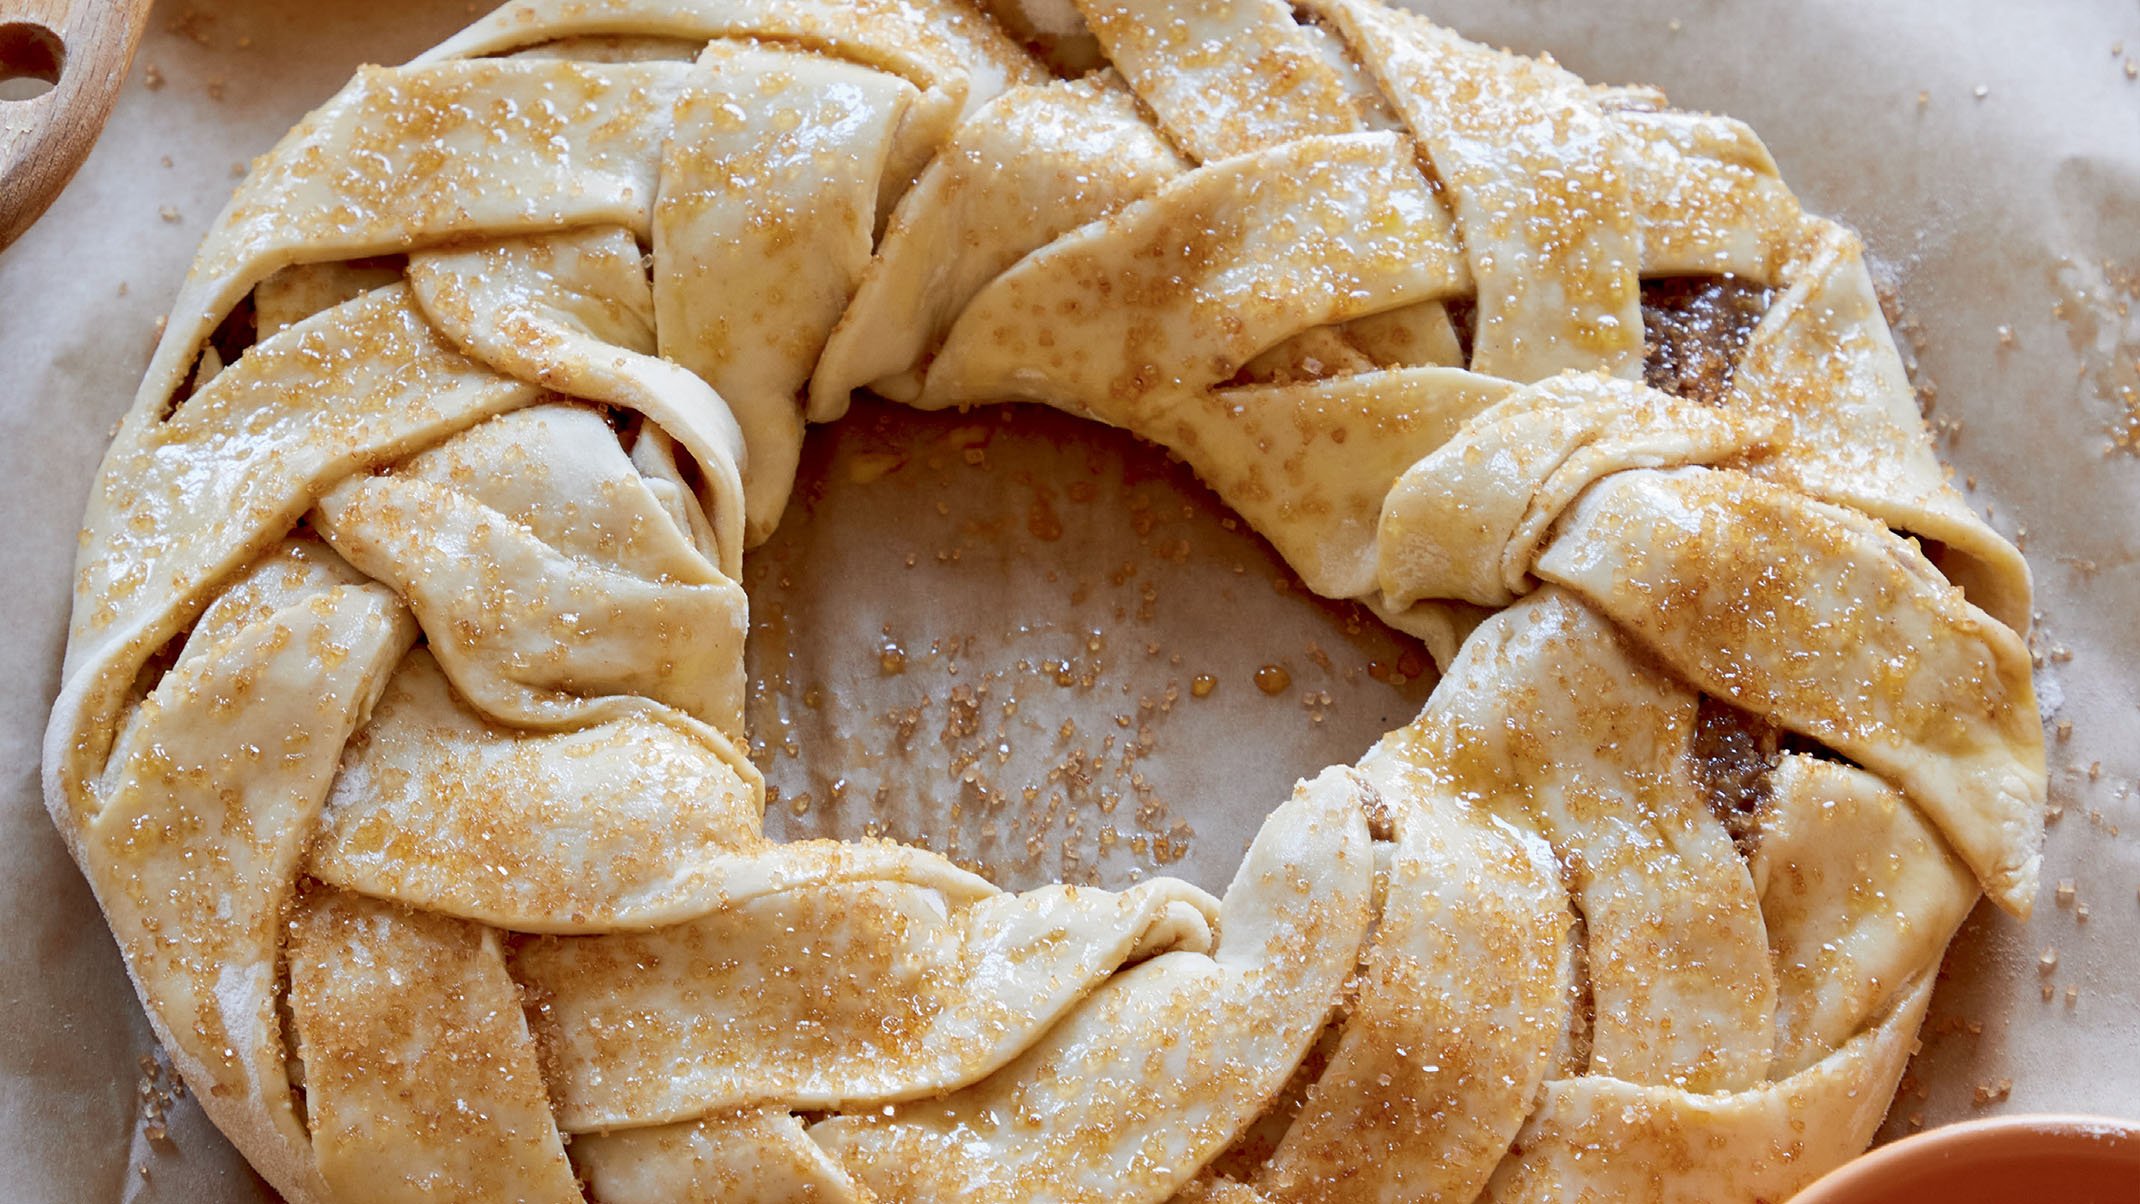 Cinnamon Nut Wreath_recipe from Sheet Pan Sweets by Molly Gilbert